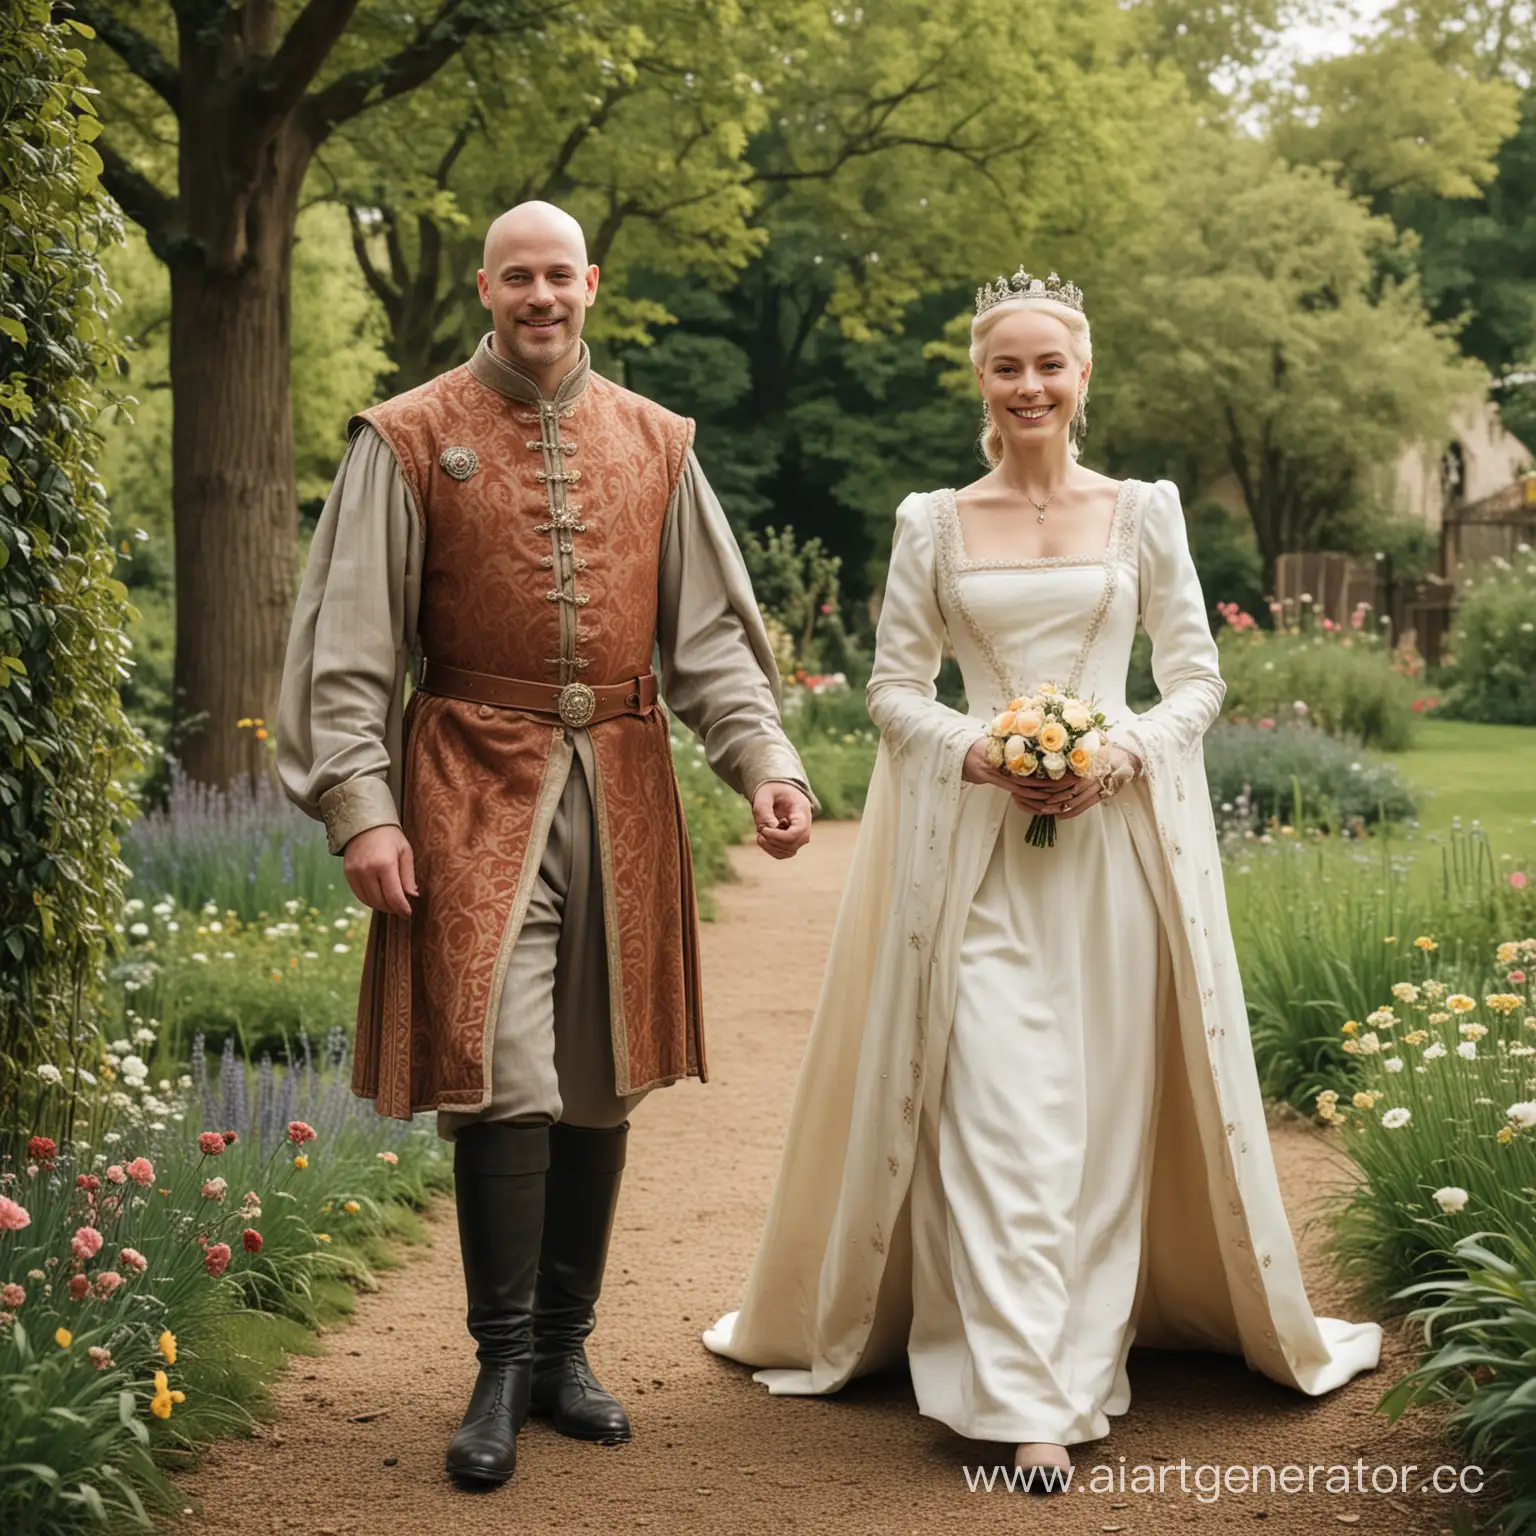 The Middle Ages, the king and queen on a walk in the garden. They stand next to each other and look directly into the camera, smiling slightly. The king is bald